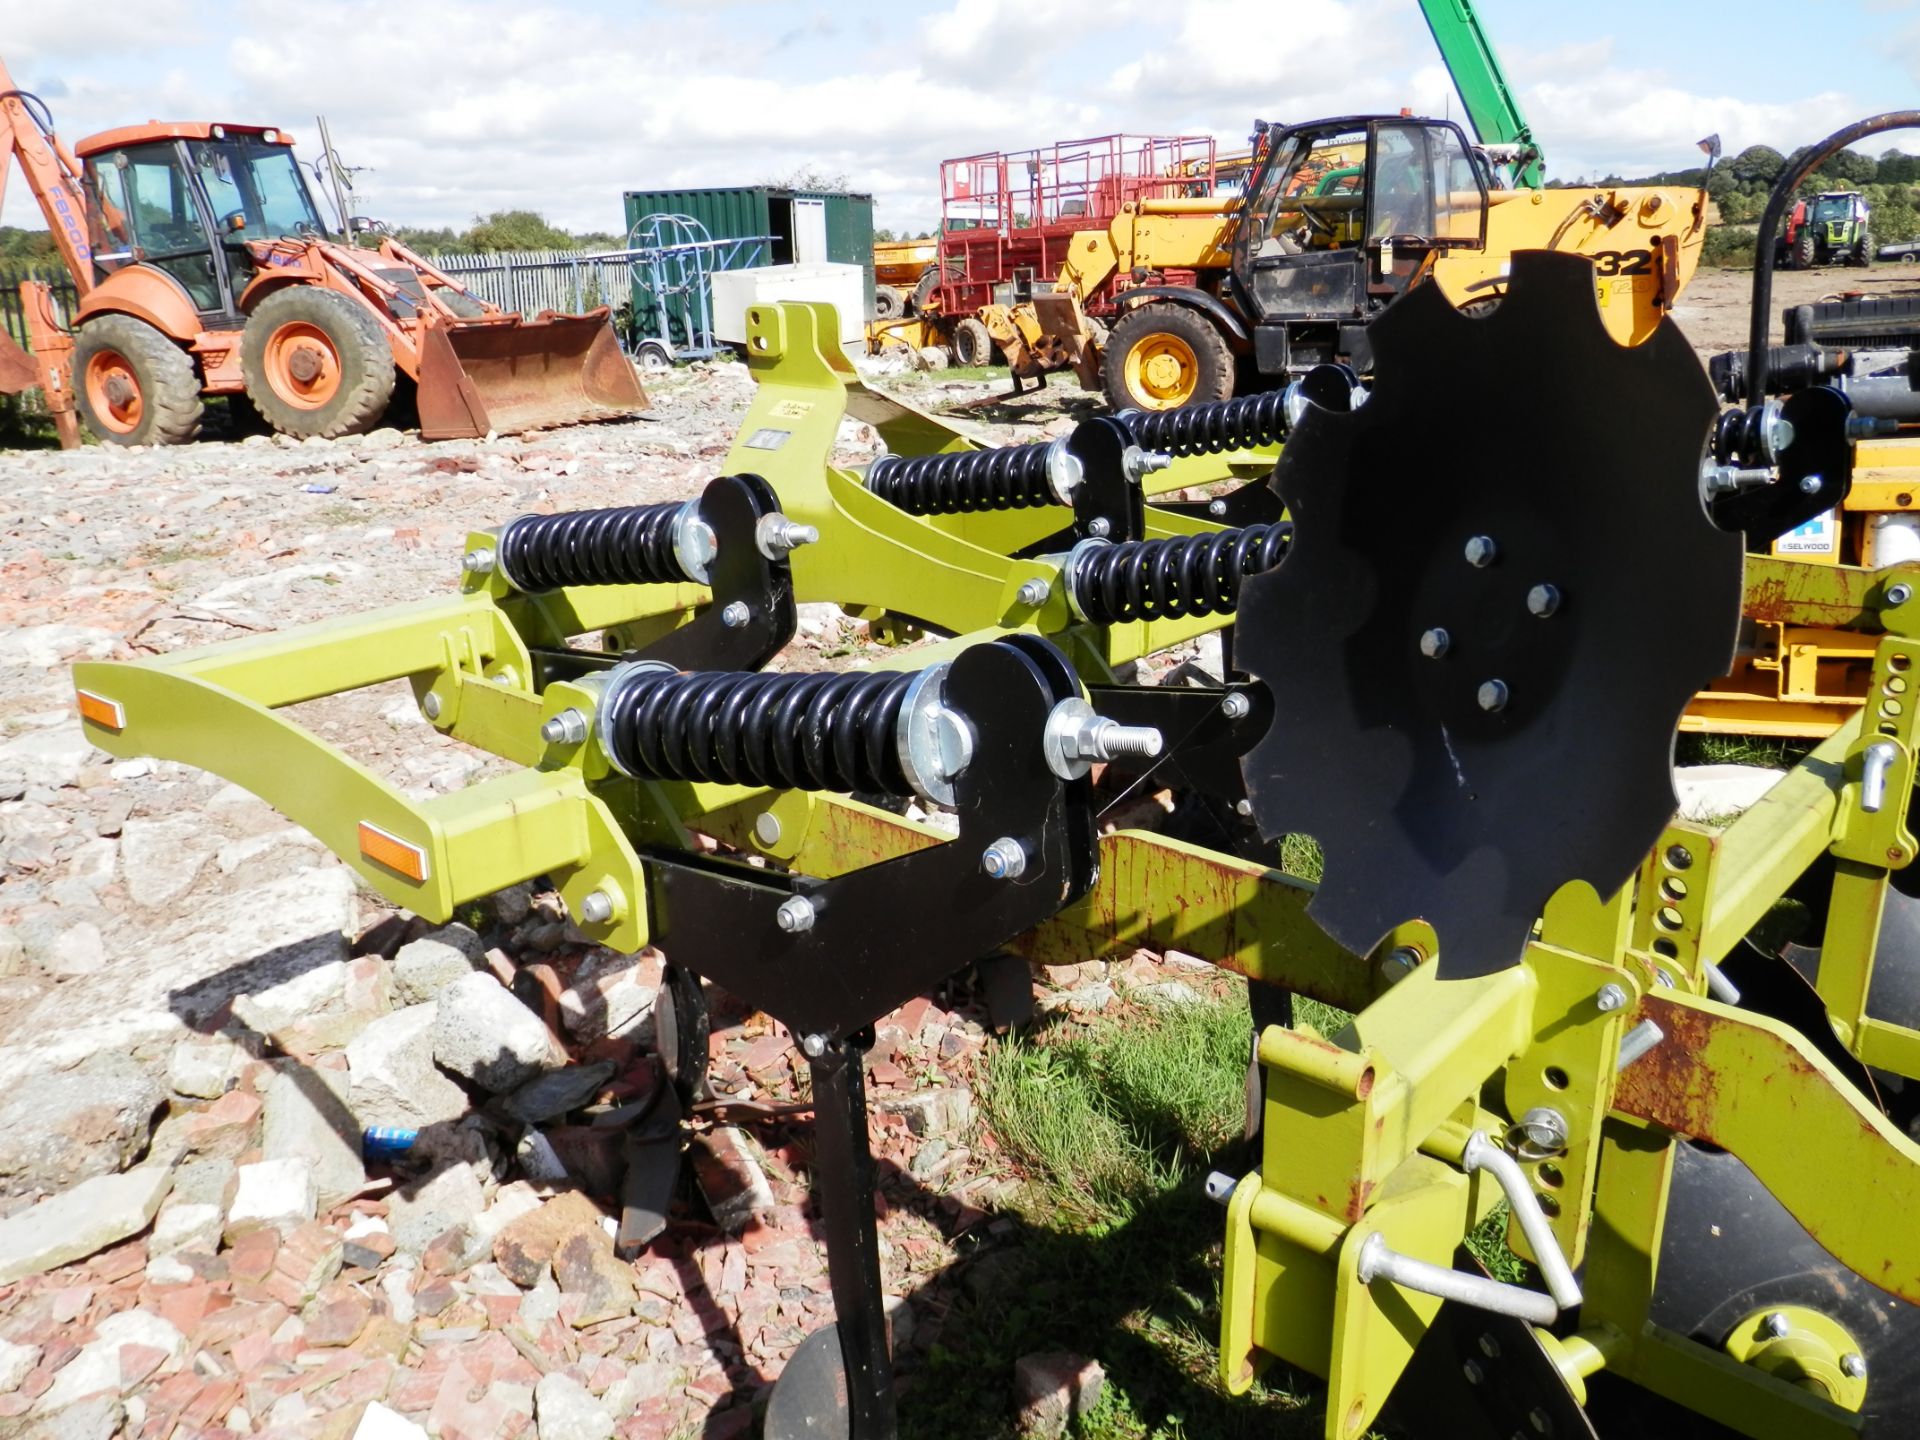 2014 UNUSED/NEW TERESA ASG-30 MINIMUM CULTIVATION TRACTOR ATTACHMENT (LEMKIN PARTS) POLISH MADE. - Image 4 of 7